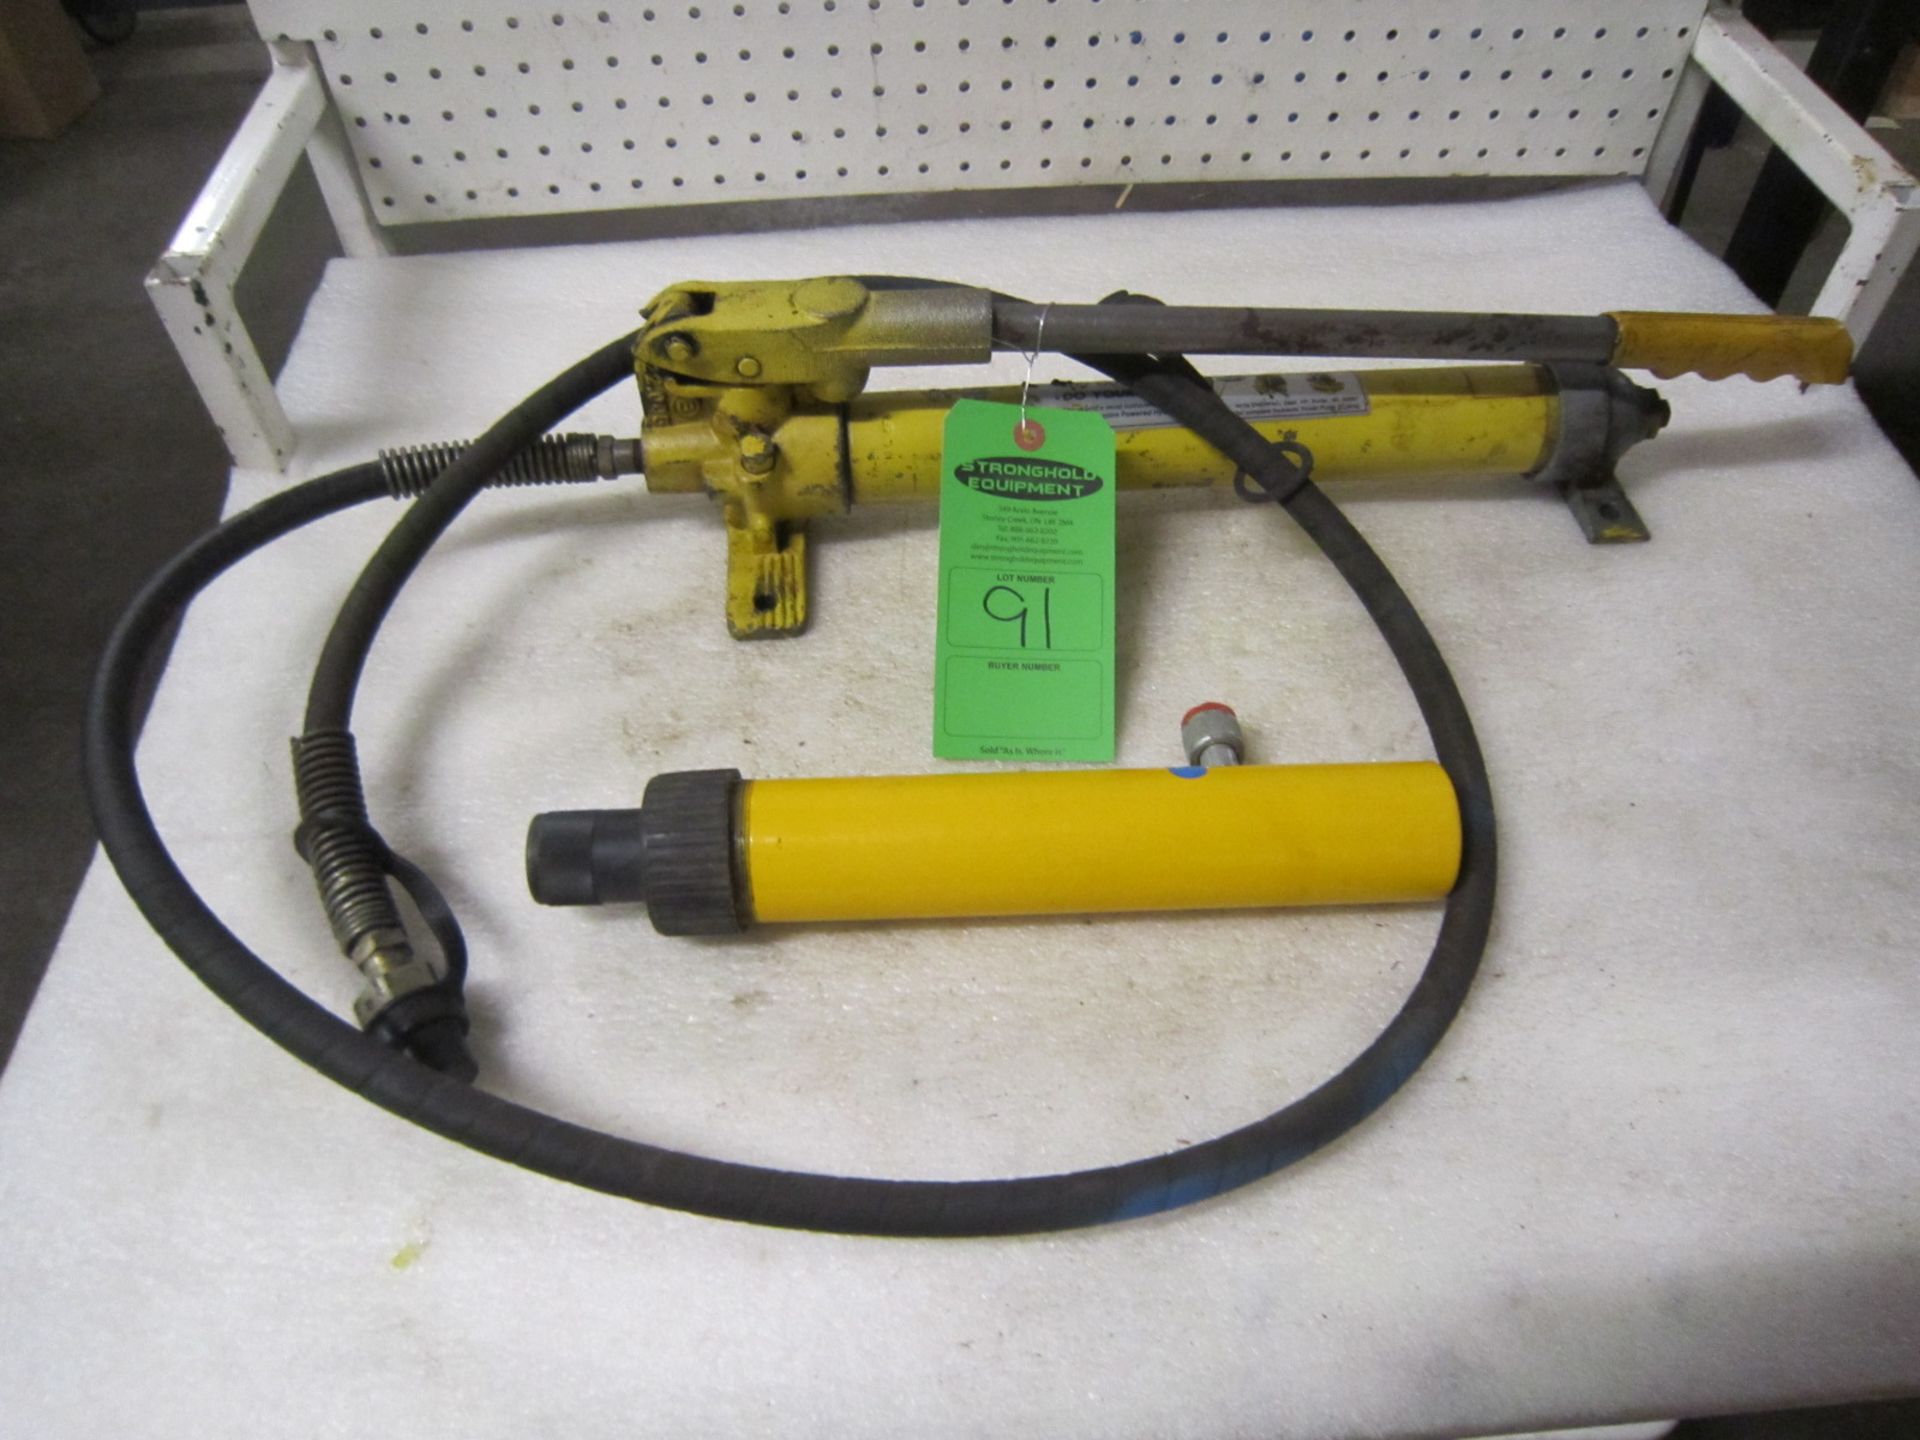 Enerpac Hydraulic Hand Pump - model PH-39 with 10 ton jack